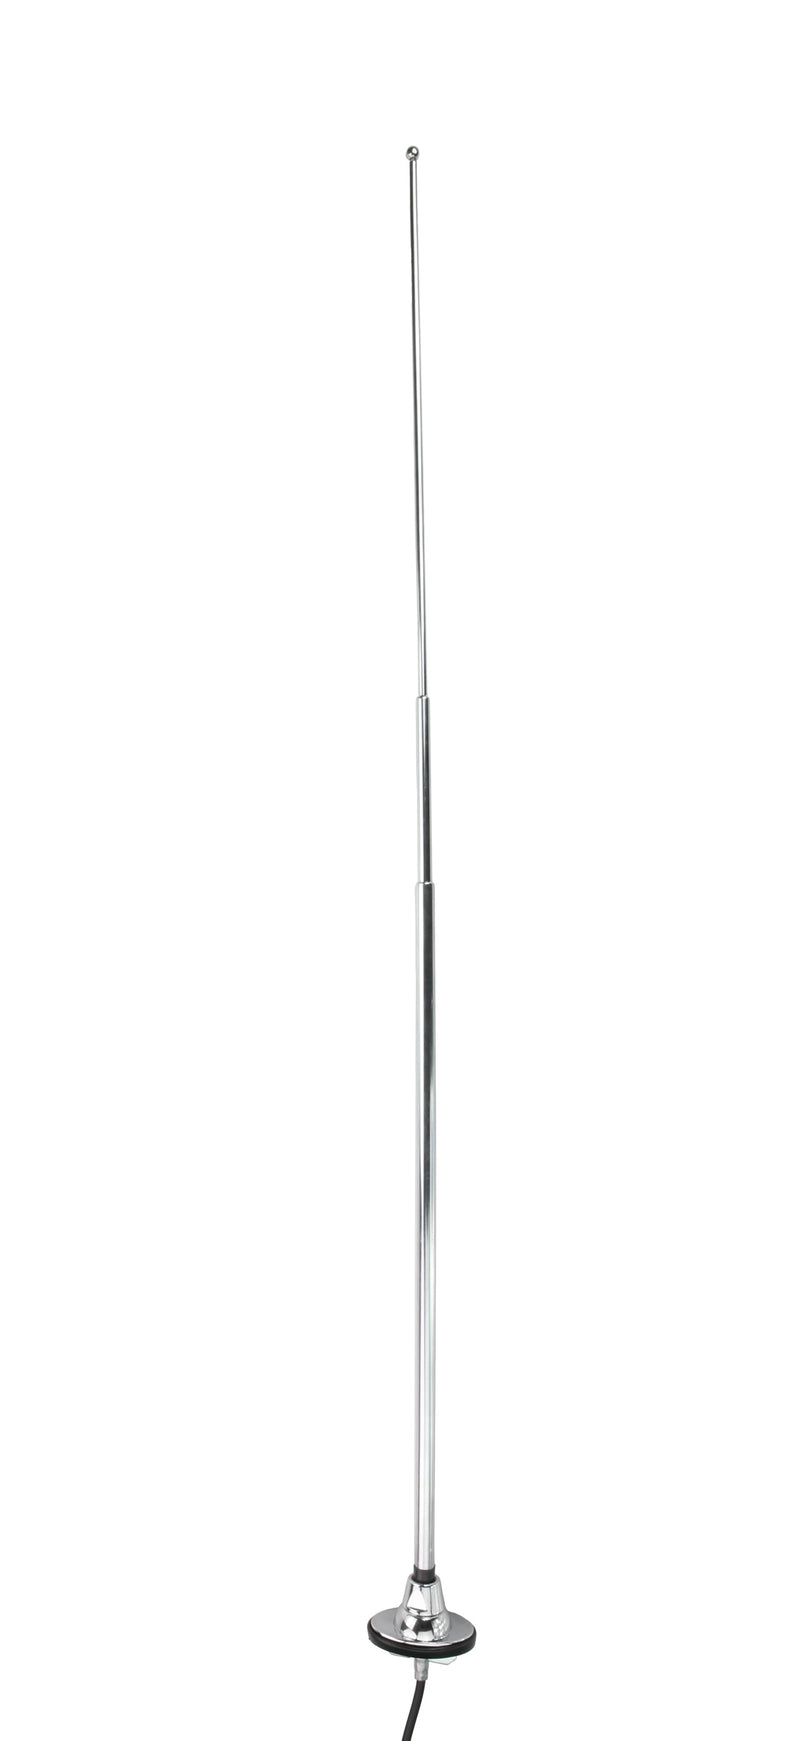 1983-88 Ford Thunderbird Replacement Antenna